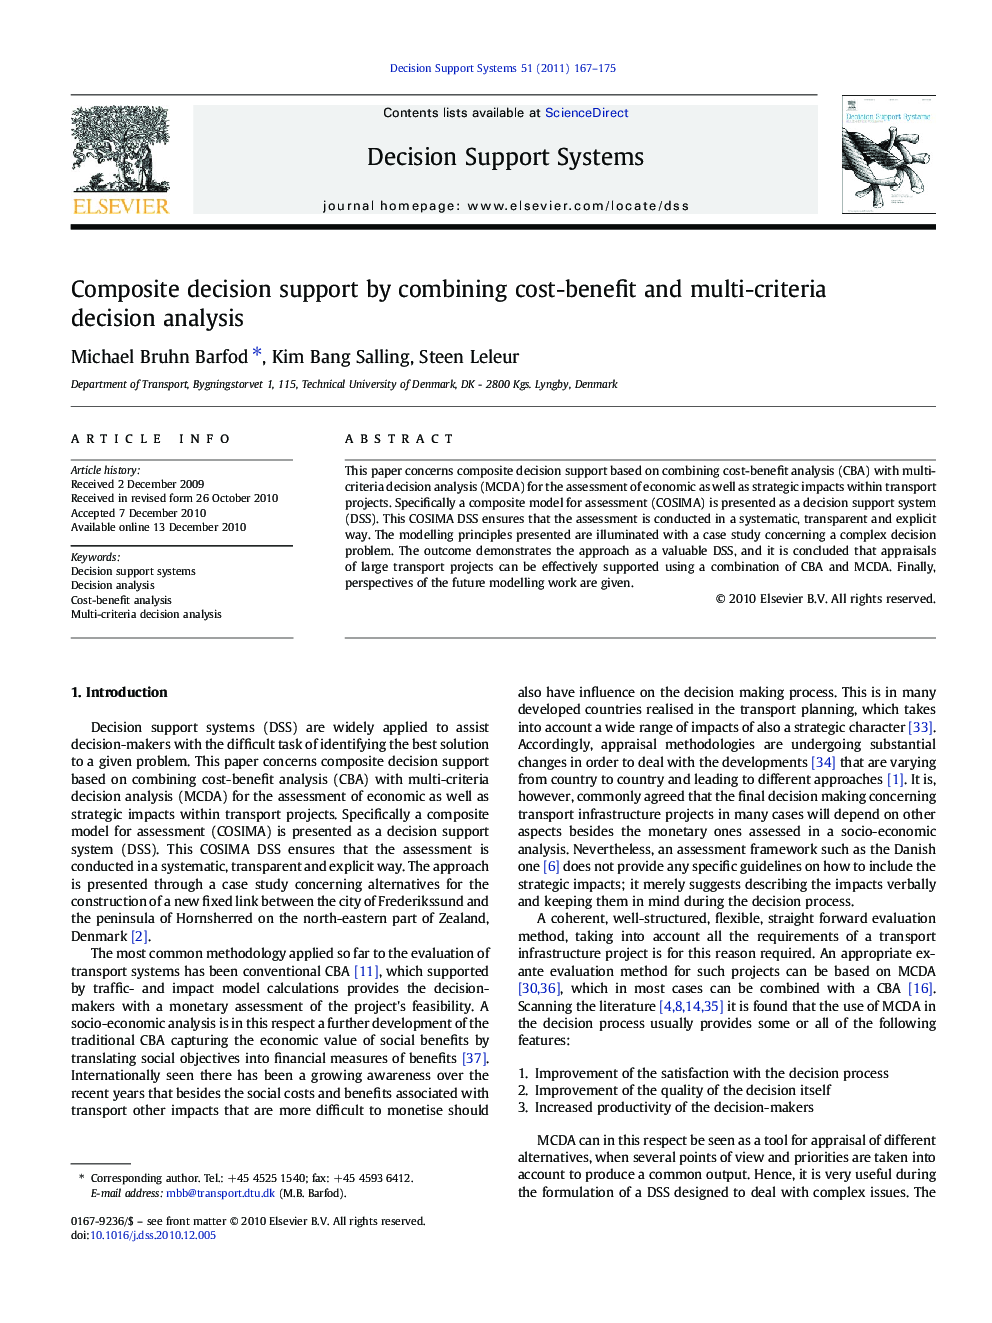 Composite decision support by combining cost-benefit and multi-criteria decision analysis